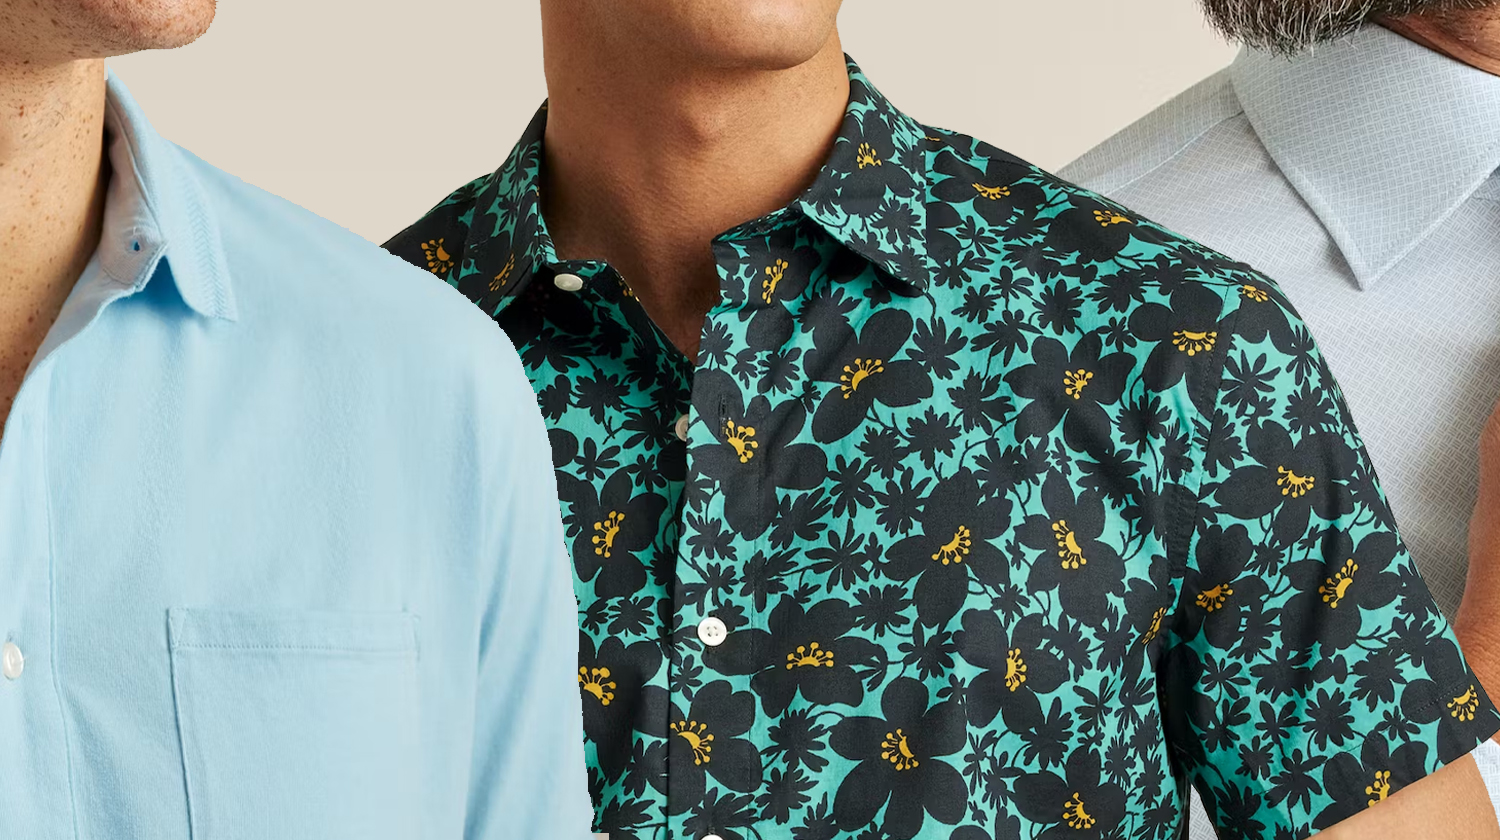 One Sale, Five Outfits: Extra 40% off Bonobos Sale Items